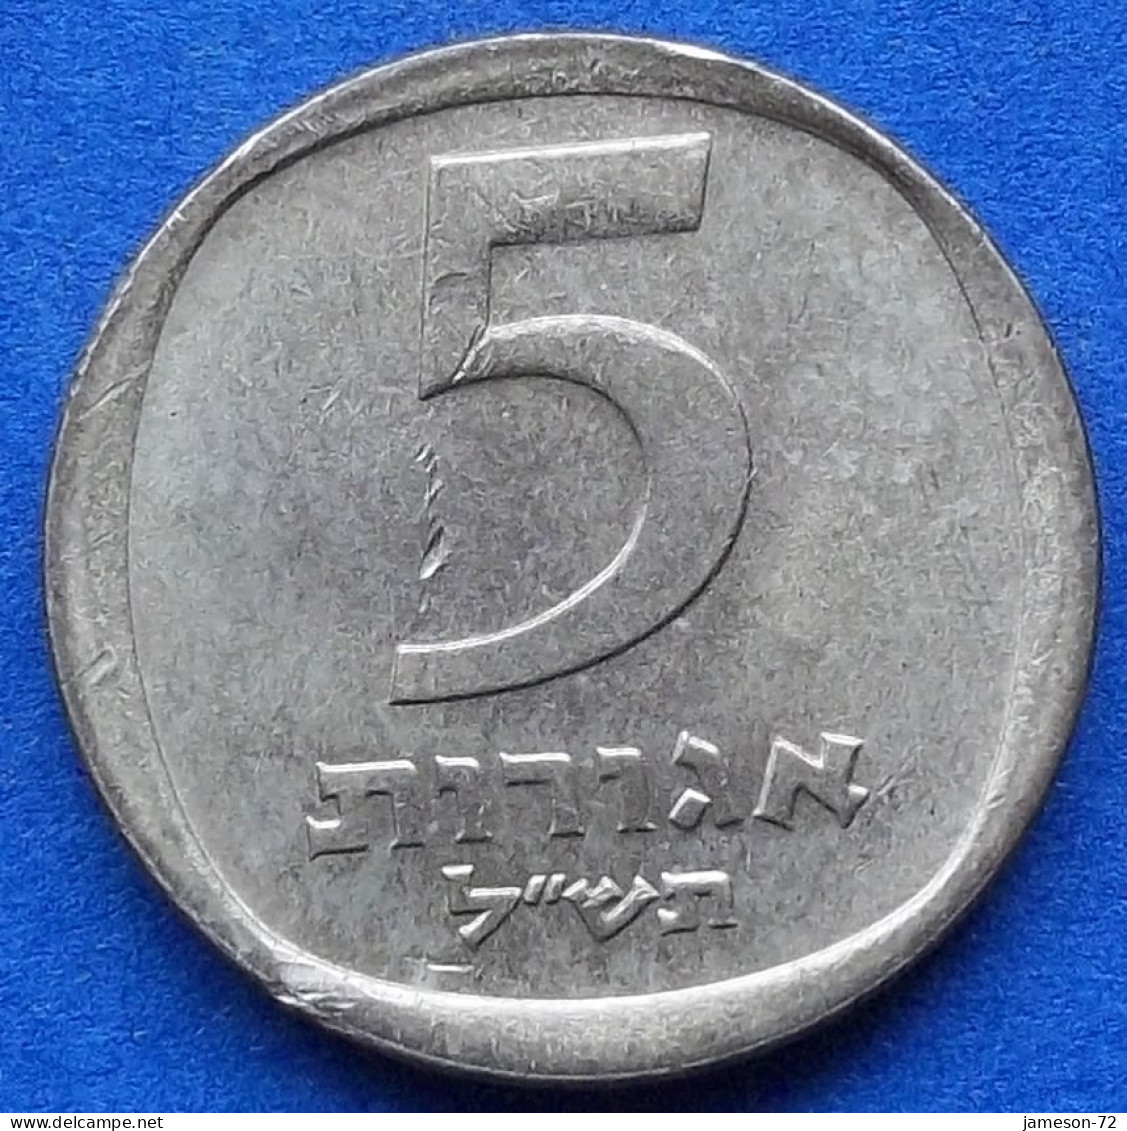 ISRAEL - 5 Agorot JE 5730 (1970AD) "Pomegranates" KM# 25 Monetary Reform (1958-1980) - Edelweiss Coins - Israel